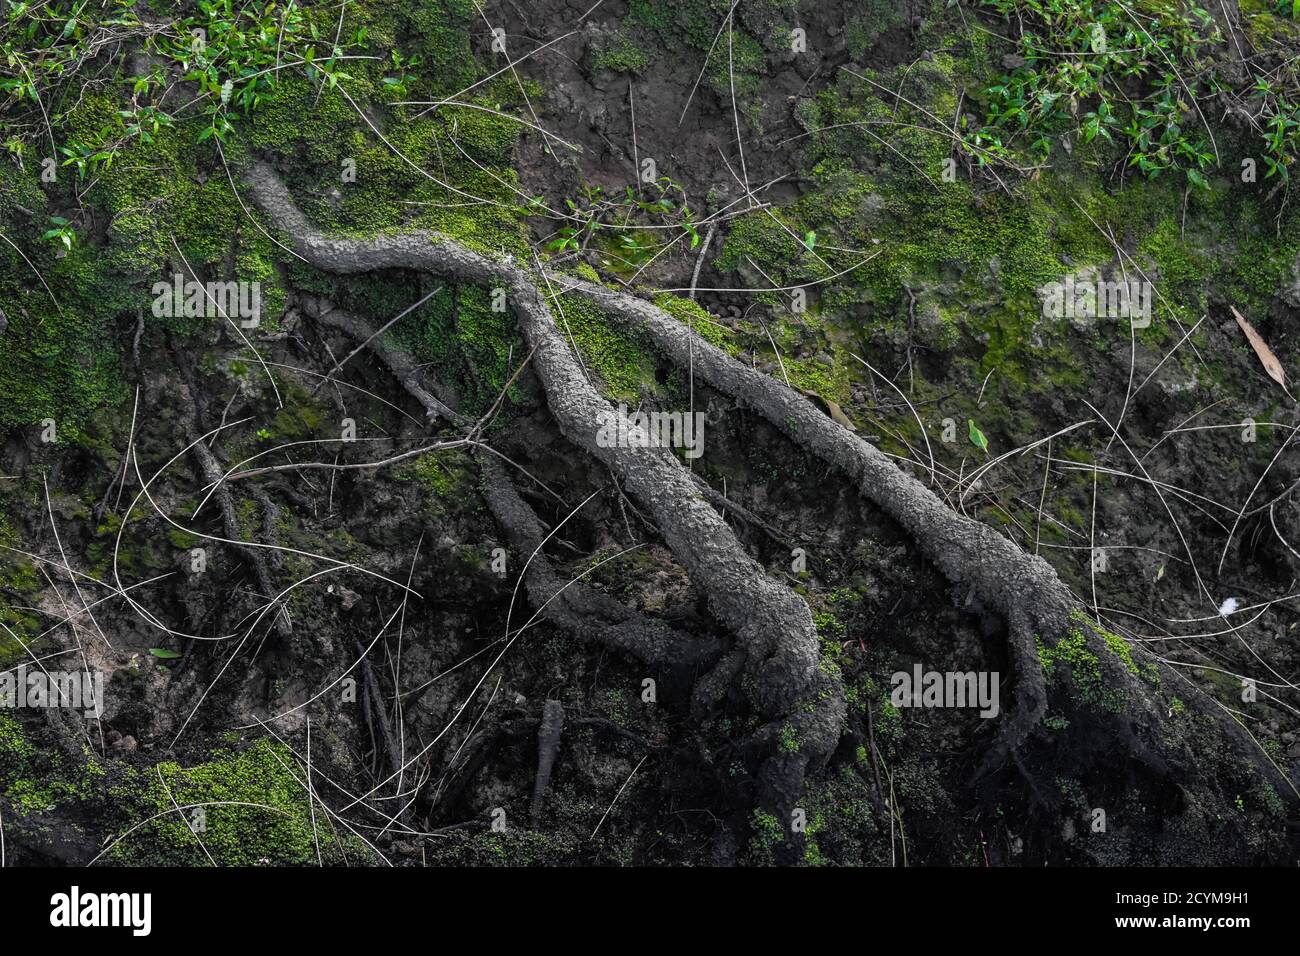 Tree roots surrounded by some shrubbery and moss with some tree needles covering the floor. The mud is also cracked. Stock Photo